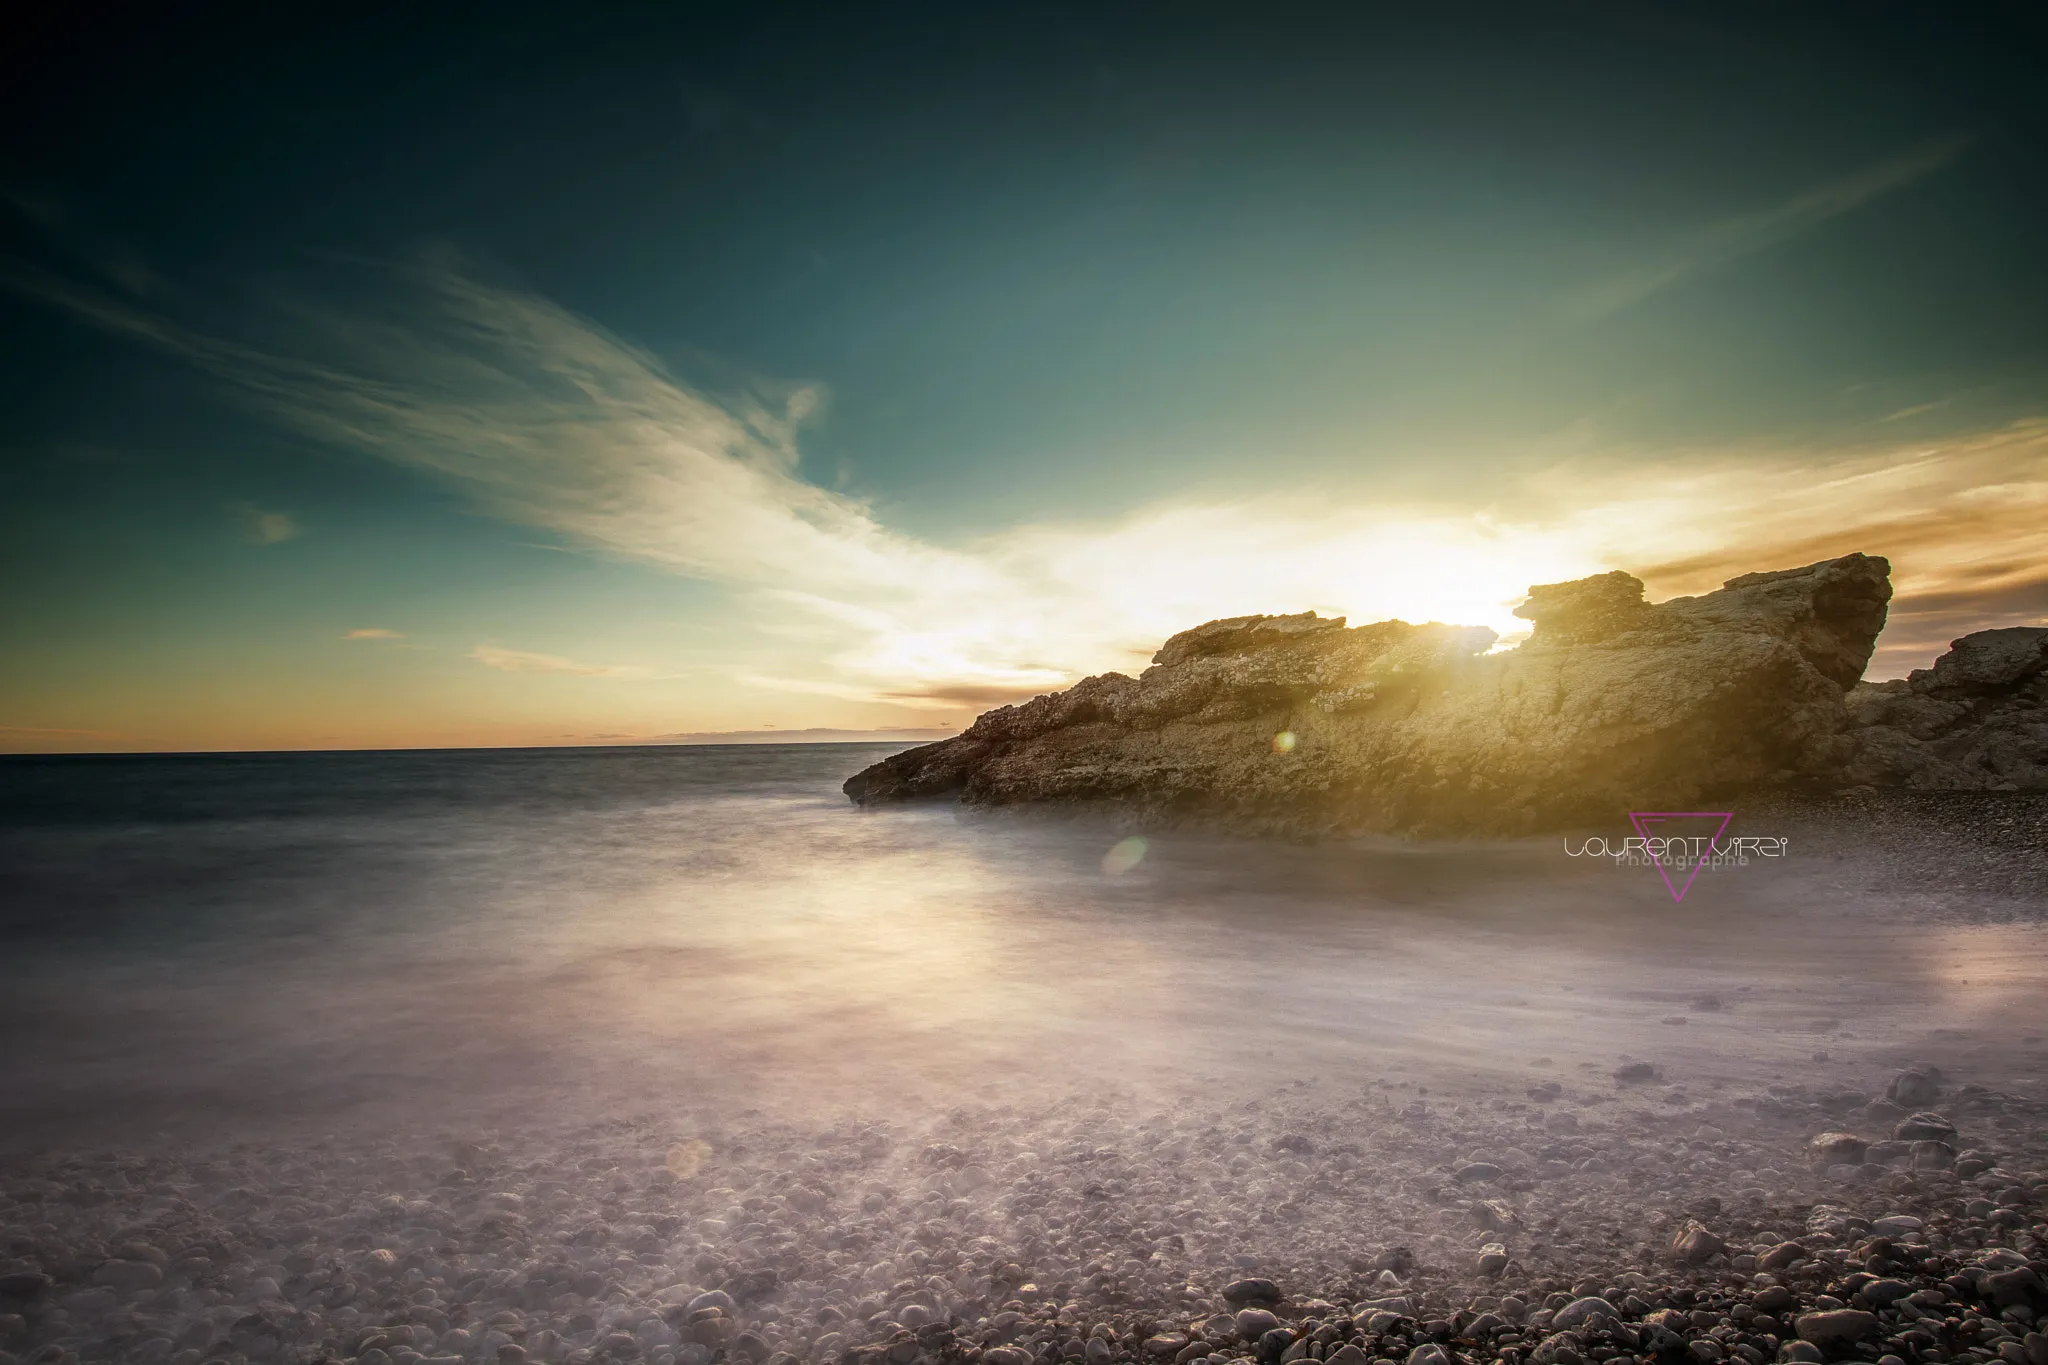 Photo showing: 500px provided description: Hotland

The heat of February at the edge of sea - Provence FRANCE [#sky ,#landscape ,#sunrise ,#sea ,#sunset ,#water ,#beach ,#travel ,#sun ,#light ,#clouds ,#coast ,#ocean ,#waves ,#rocks ,#beautiful ,#france ,#seascape ,#landscapes ,#long exposure ,#paca ,#provence-alpes-cote-d'azur]